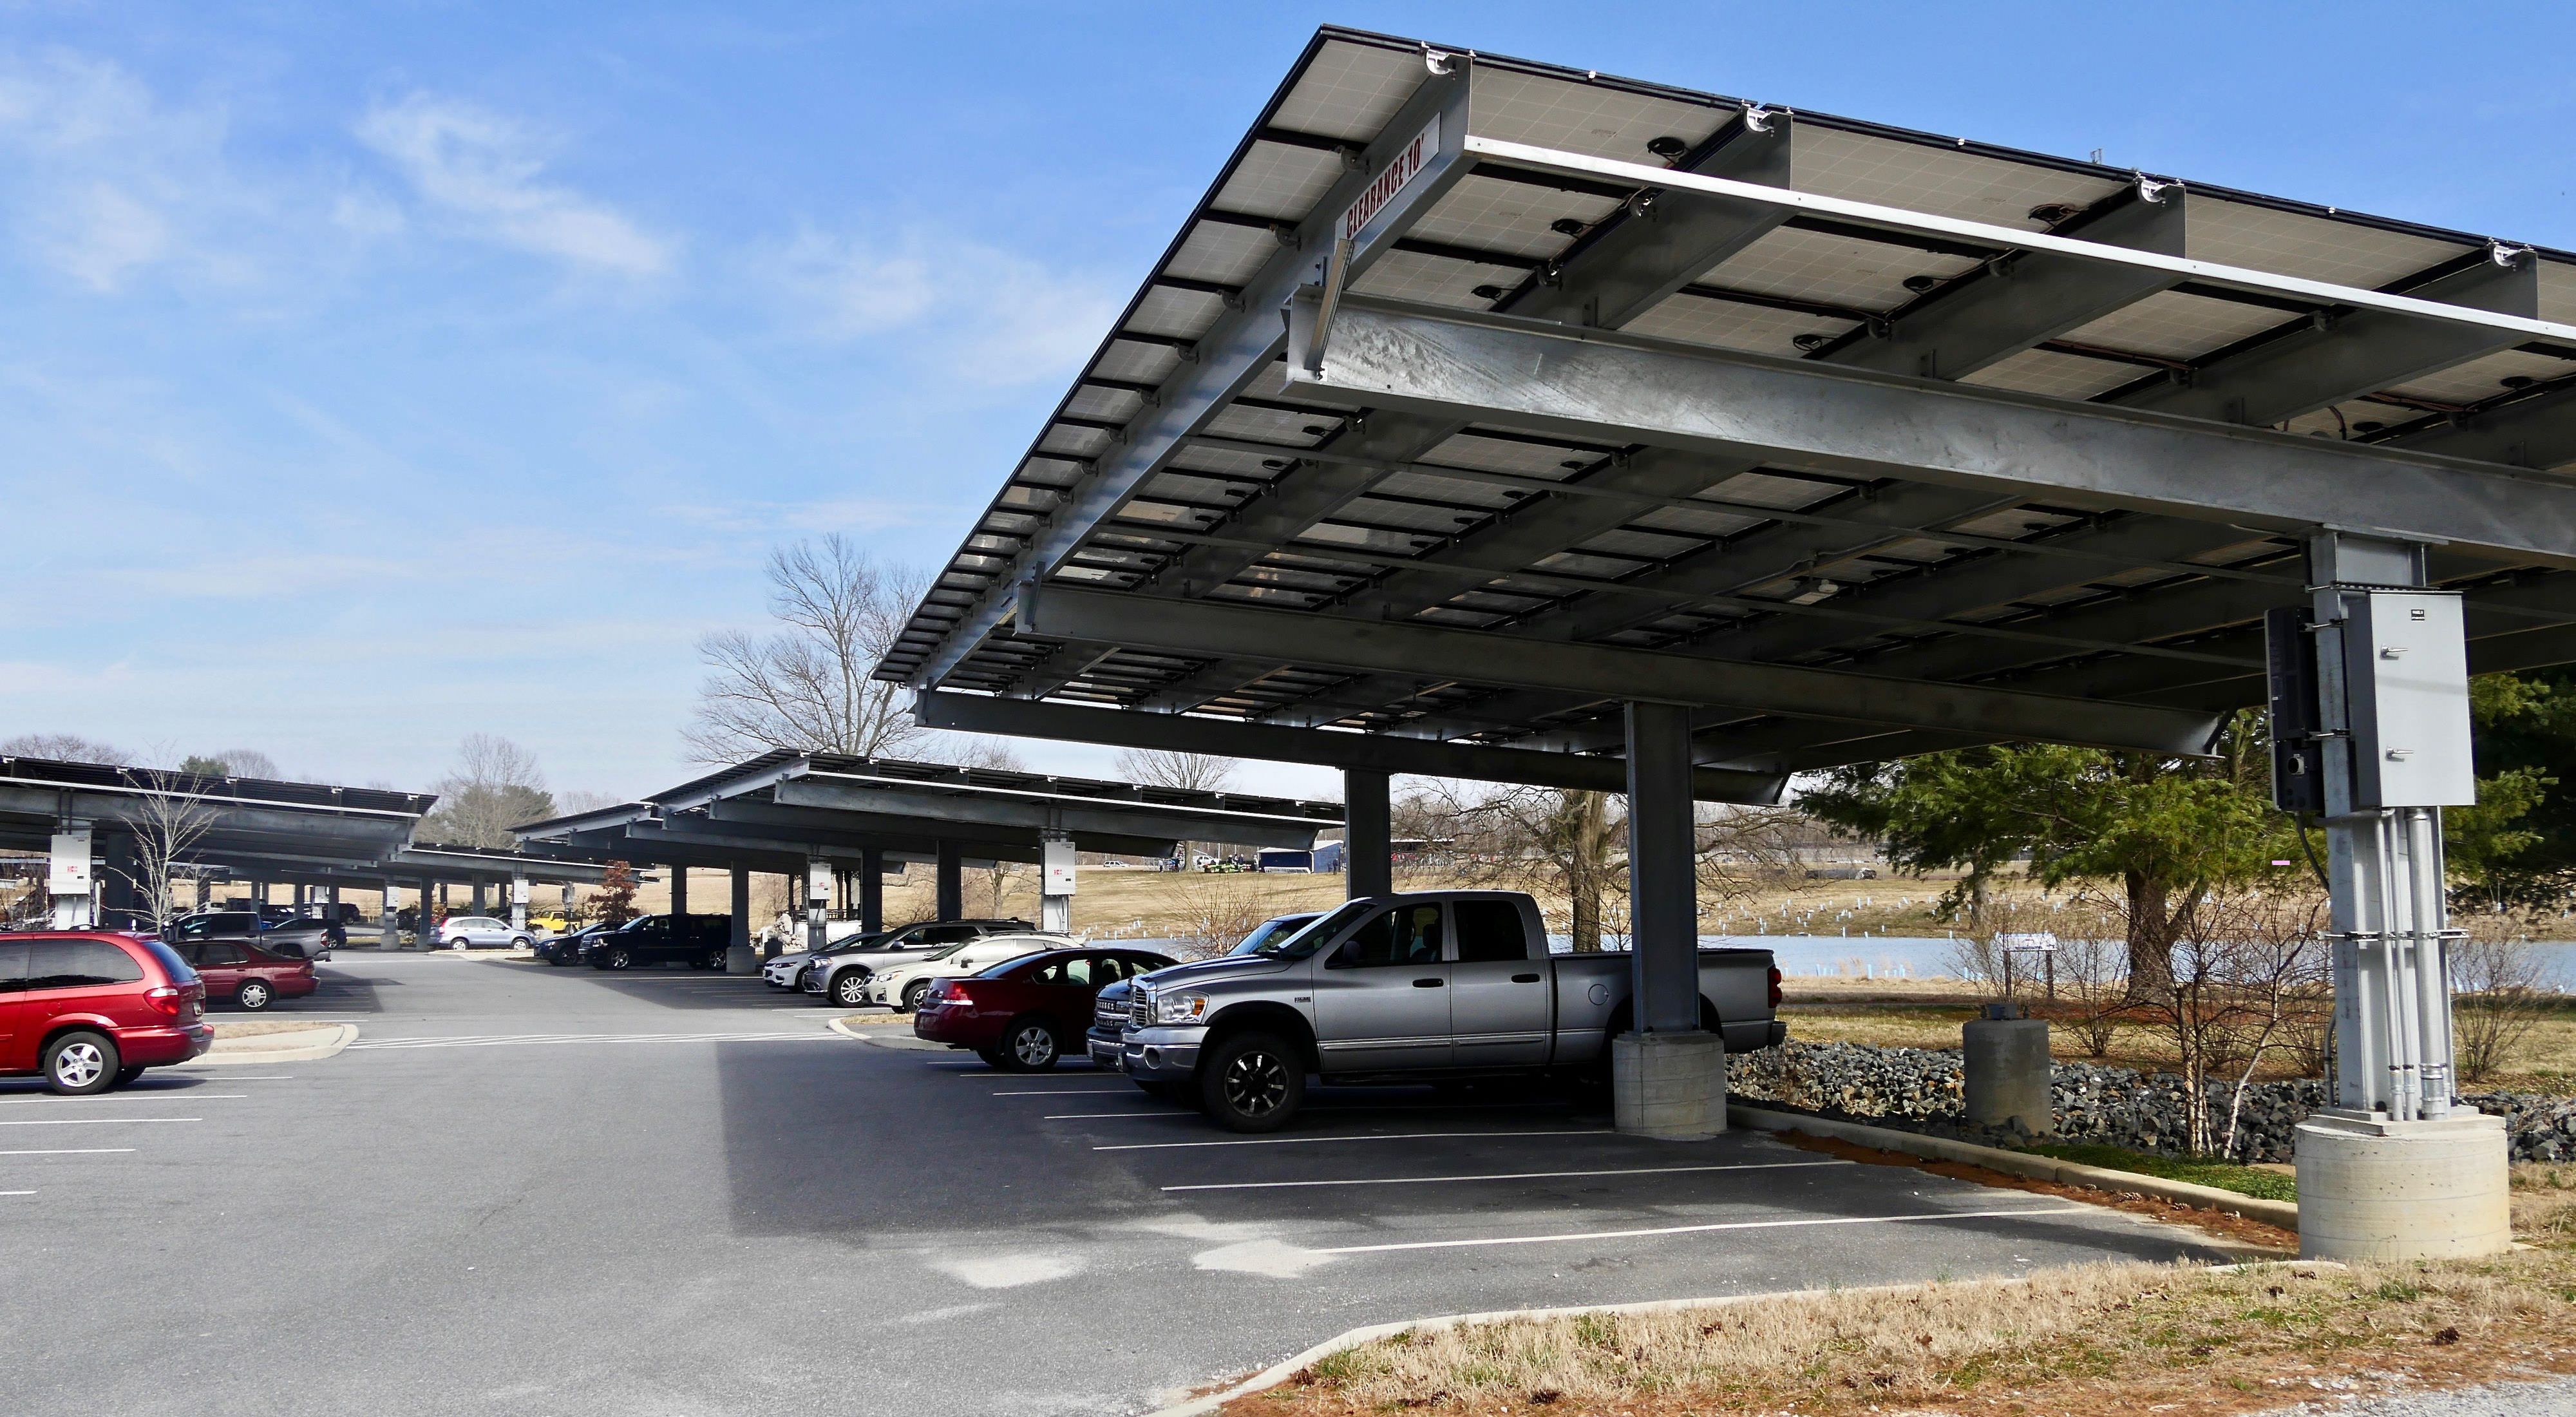 Car and trucks are parked in rows at a commuter parking lot. Large solar arrays spanning 6 or 7 parking spaces shade the vehicles while generating energy.